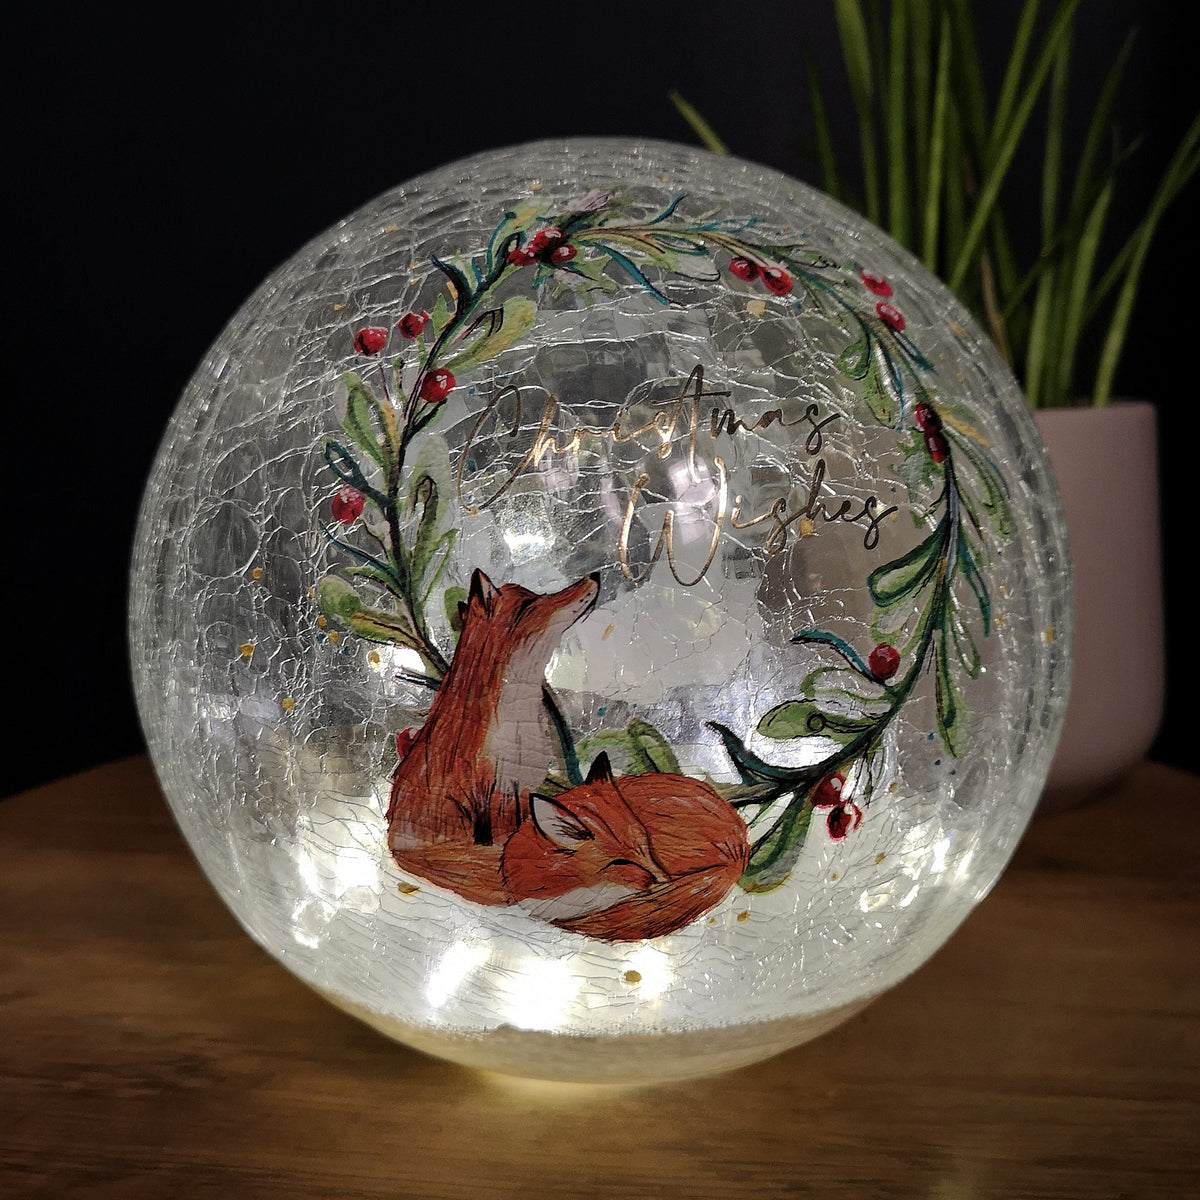 20cm Battery Operated Warm White LED Crackle Effect Ball Christmas Decoration with Christmas Wishes and Fox